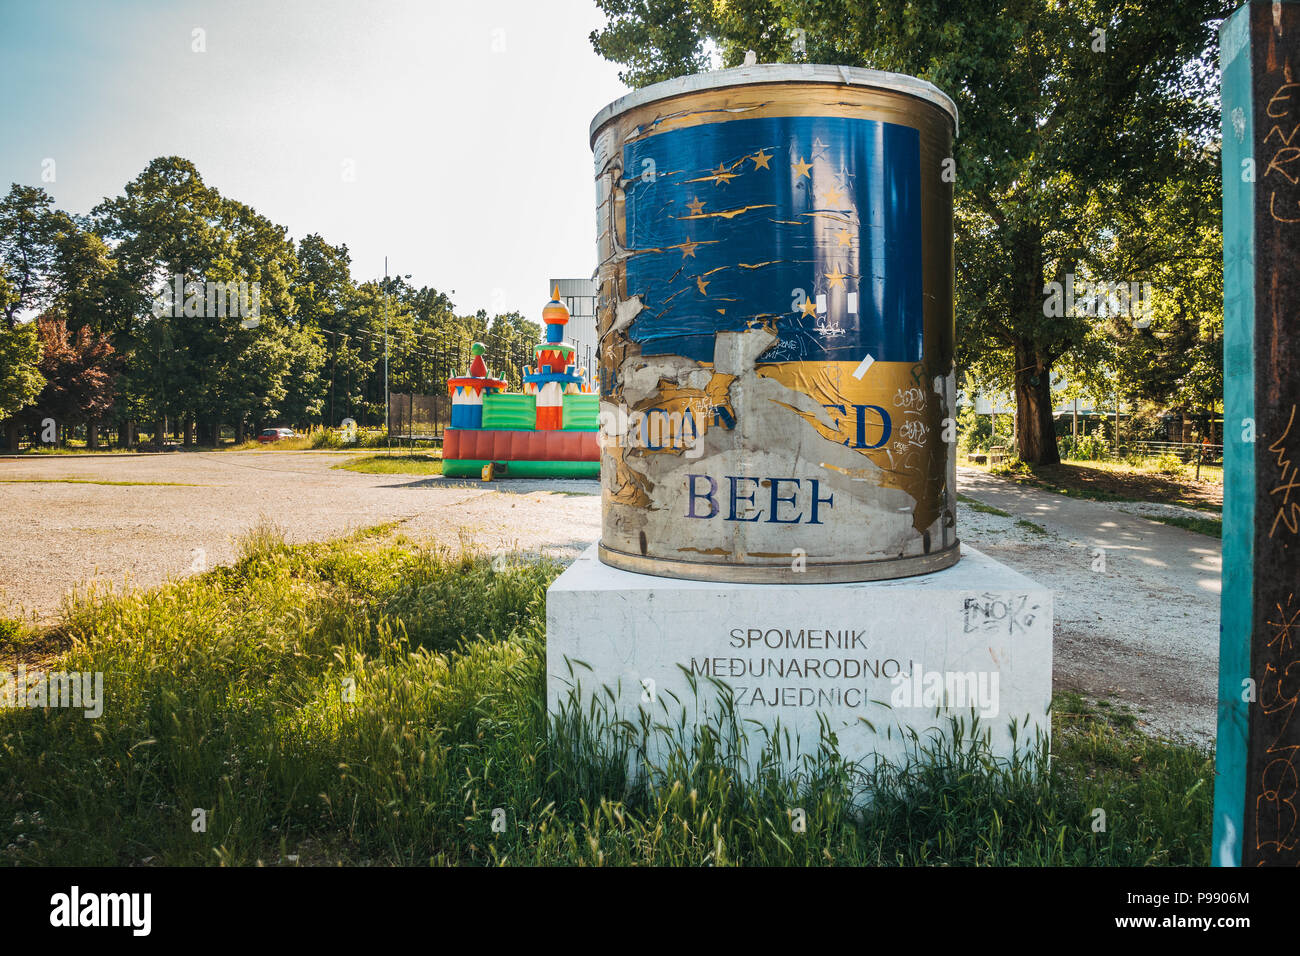 ICAR Canned Beef Monument in Sarajevo. The inscription 'Monument to the International Community by the grateful citizens of Sarajevo' is ironic. Stock Photo